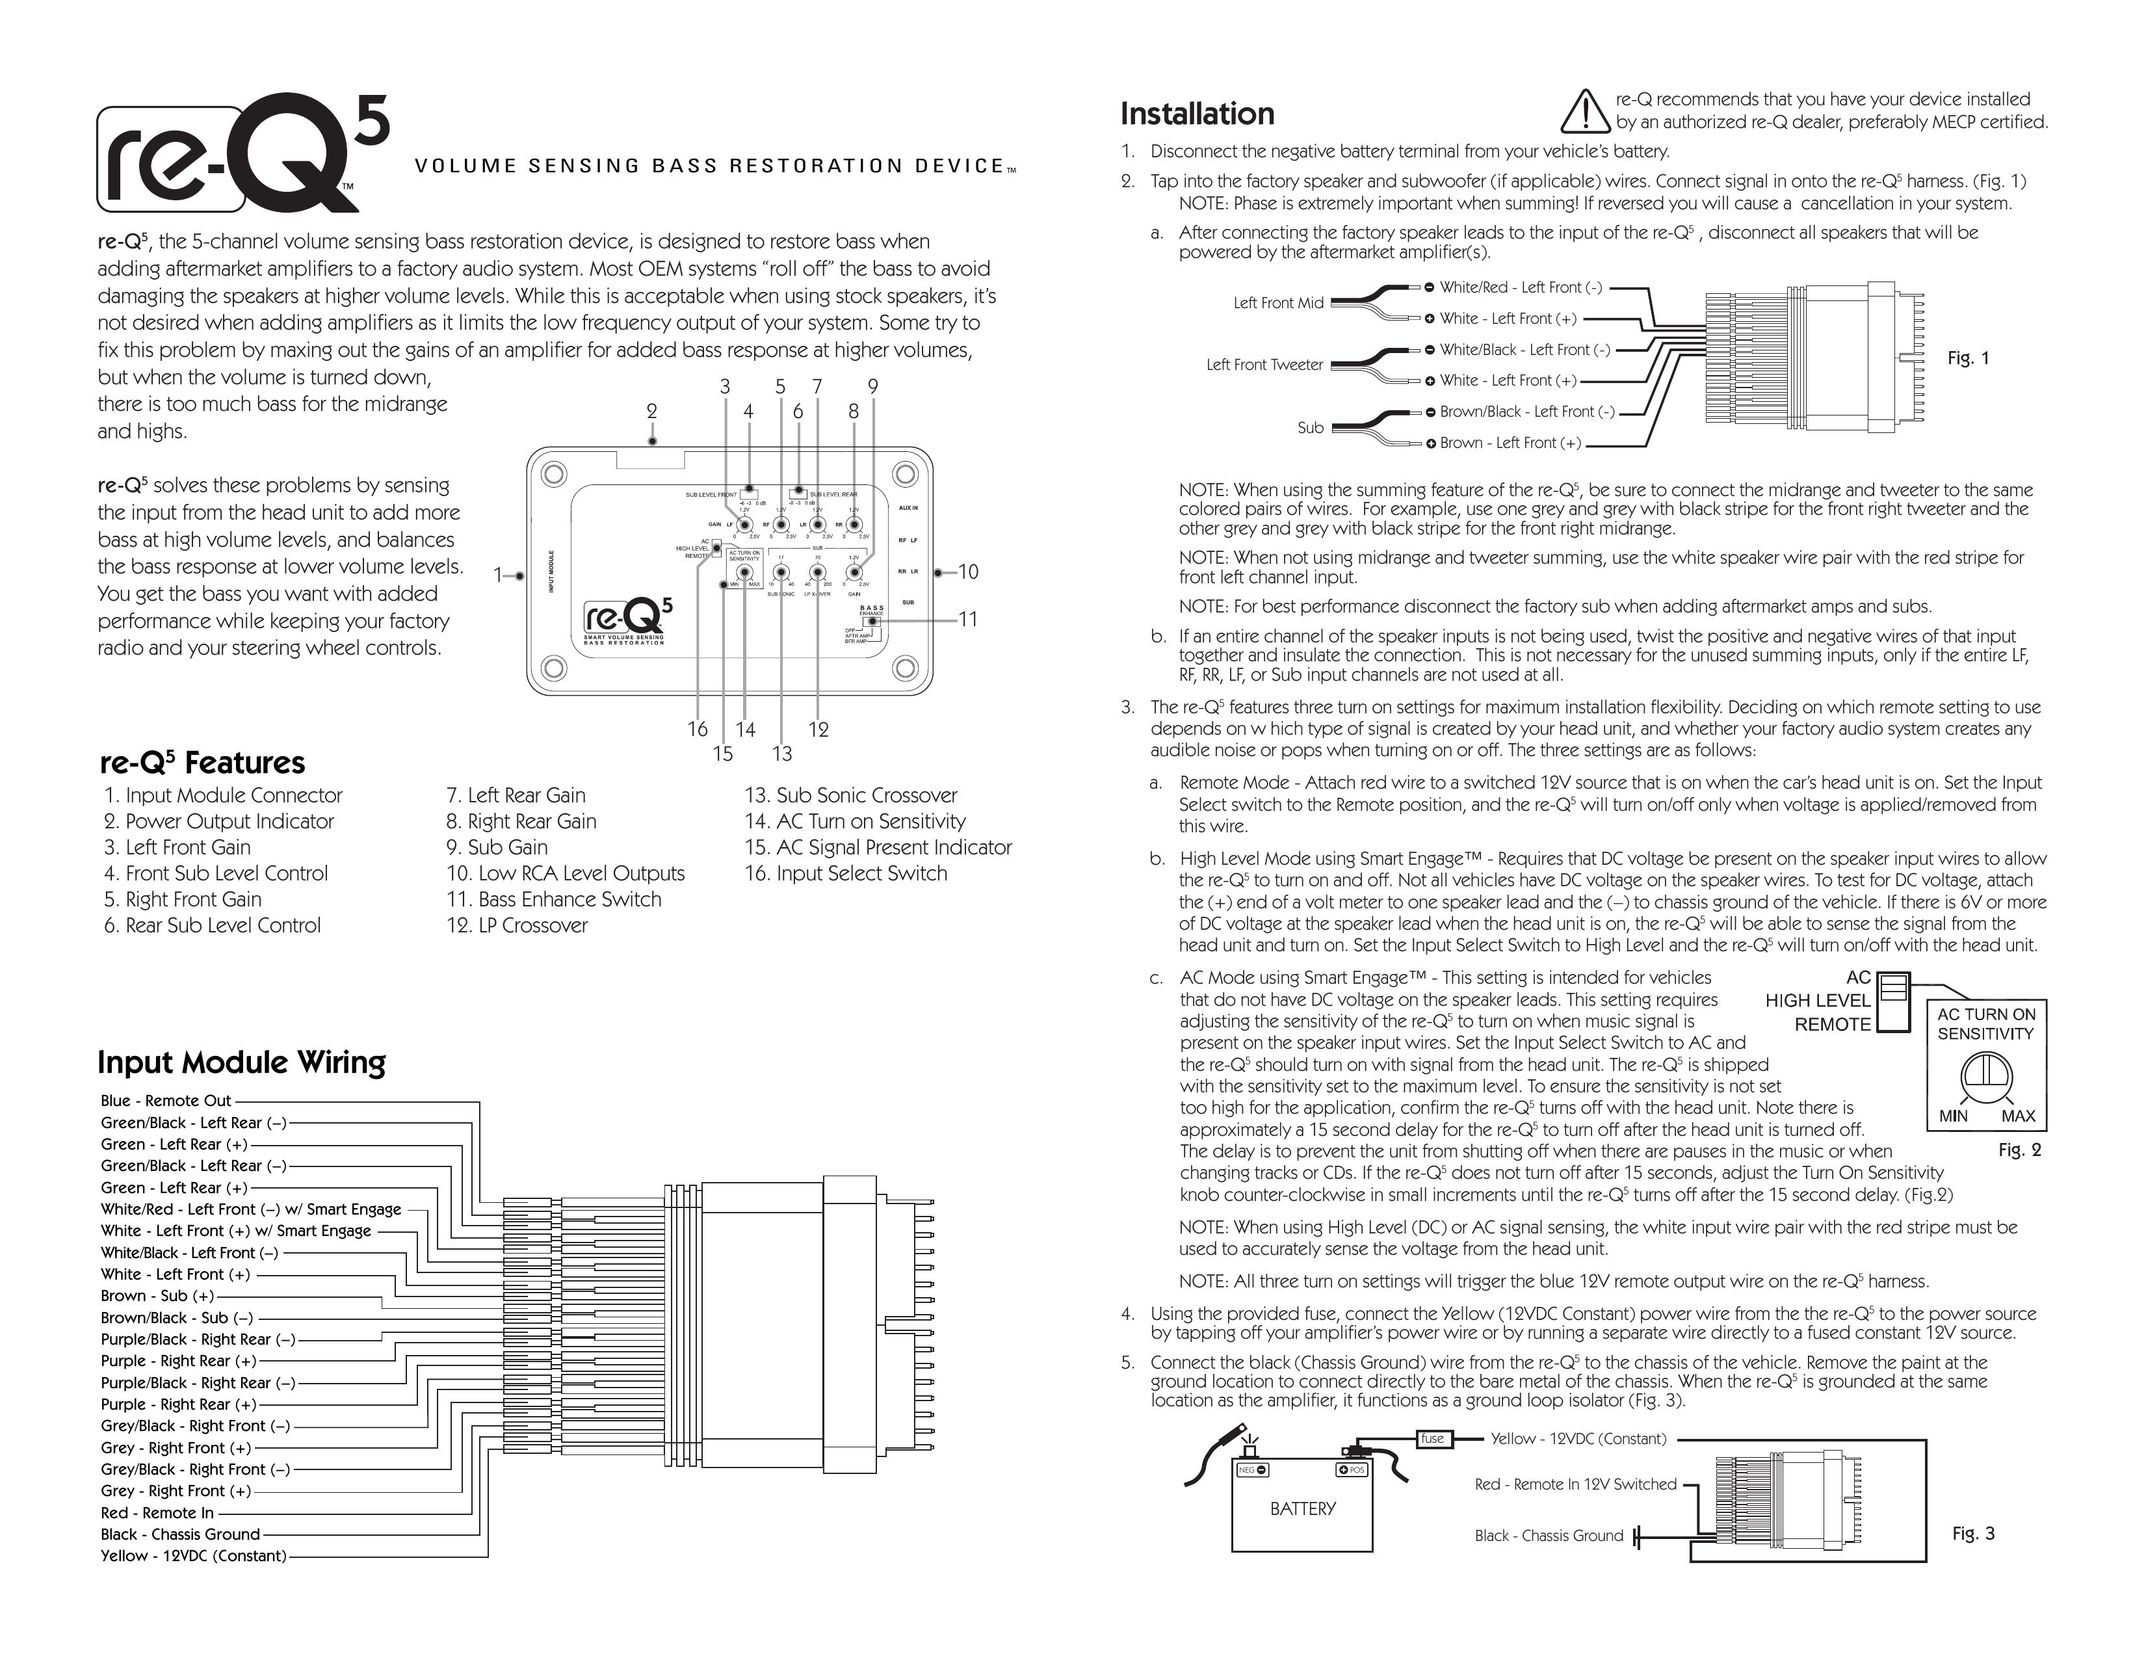 RCA re-Q5 Stereo Amplifier User Manual